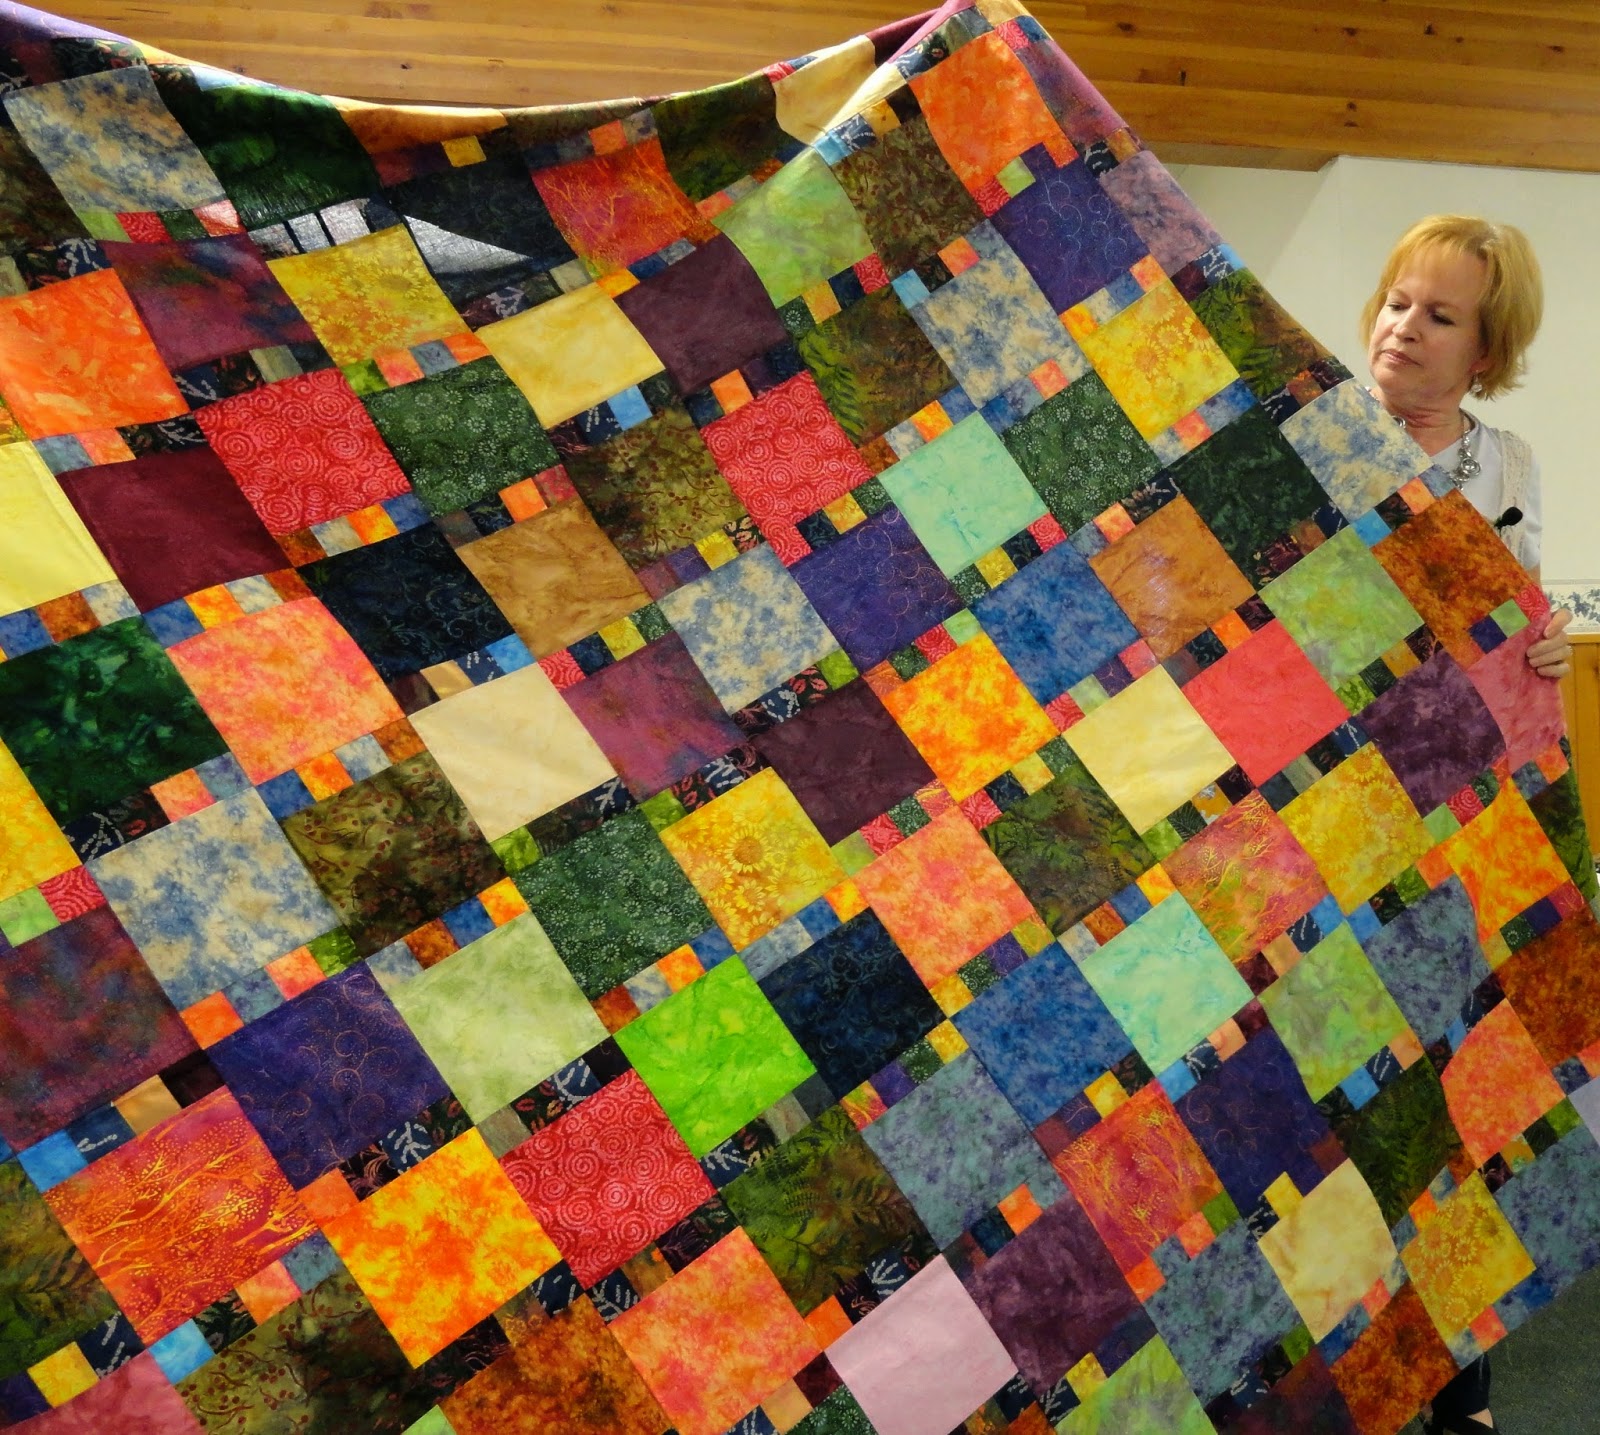 She showed many examples of her different quilts: